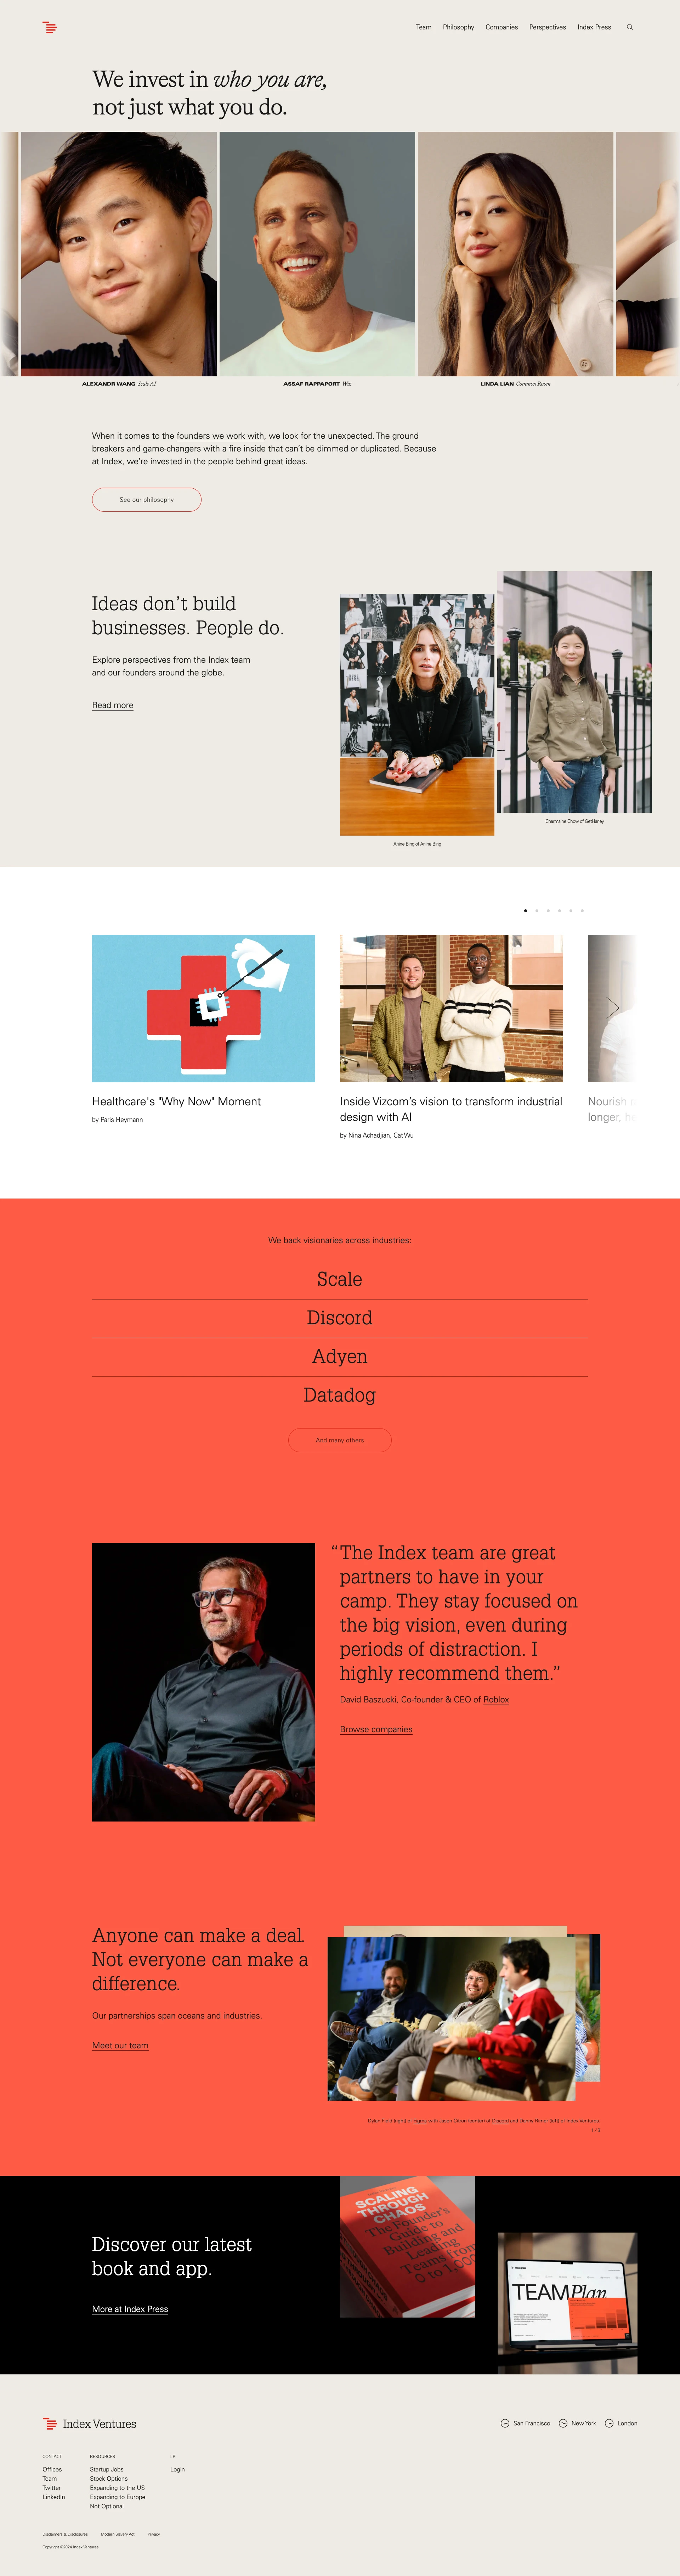 Index Ventures Landing Page Example: We invest in who you are, not just what you do. When it comes to the founders we work with, we look for the unexpected. The ground breakers and game-changers with a fire inside that can’t be dimmed or duplicated. Because at Index, we’re invested in the people behind great ideas.